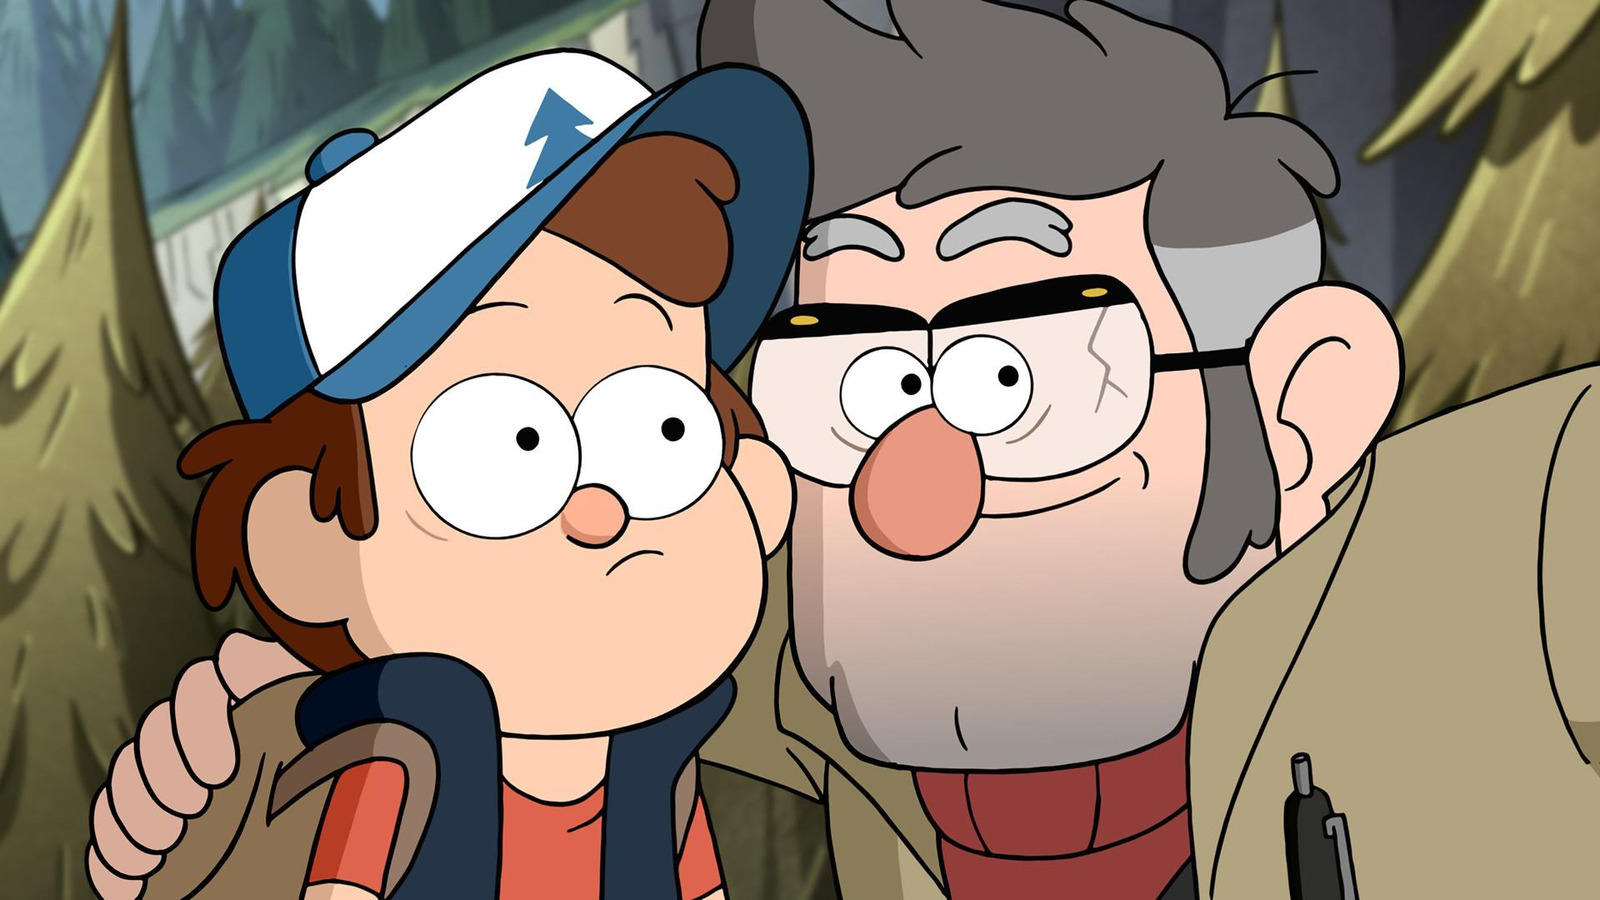 Gravity Falls' is the perfect show for the start of summer